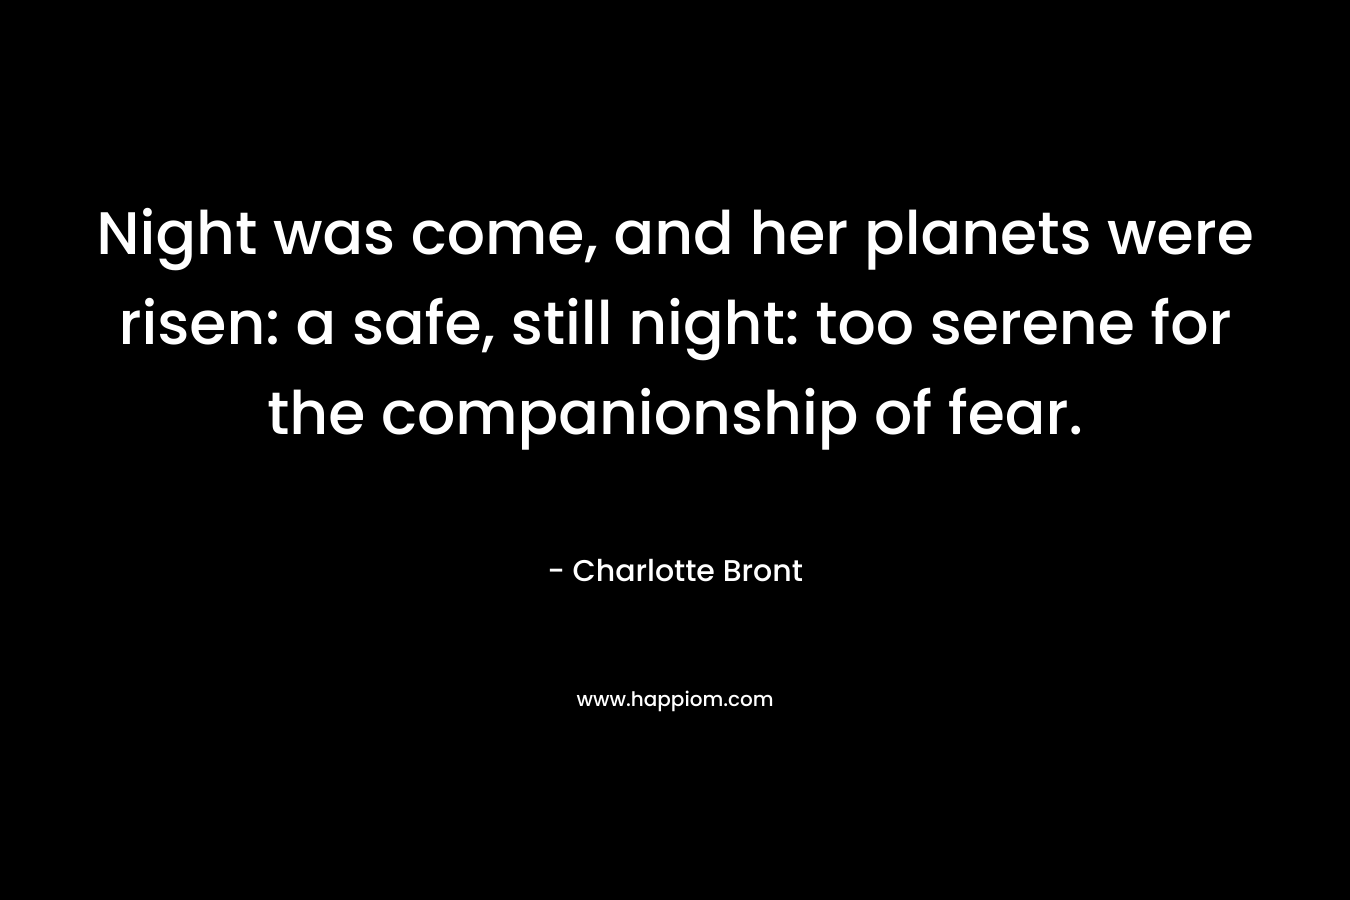 Night was come, and her planets were risen: a safe, still night: too serene for the companionship of fear. – Charlotte Bront